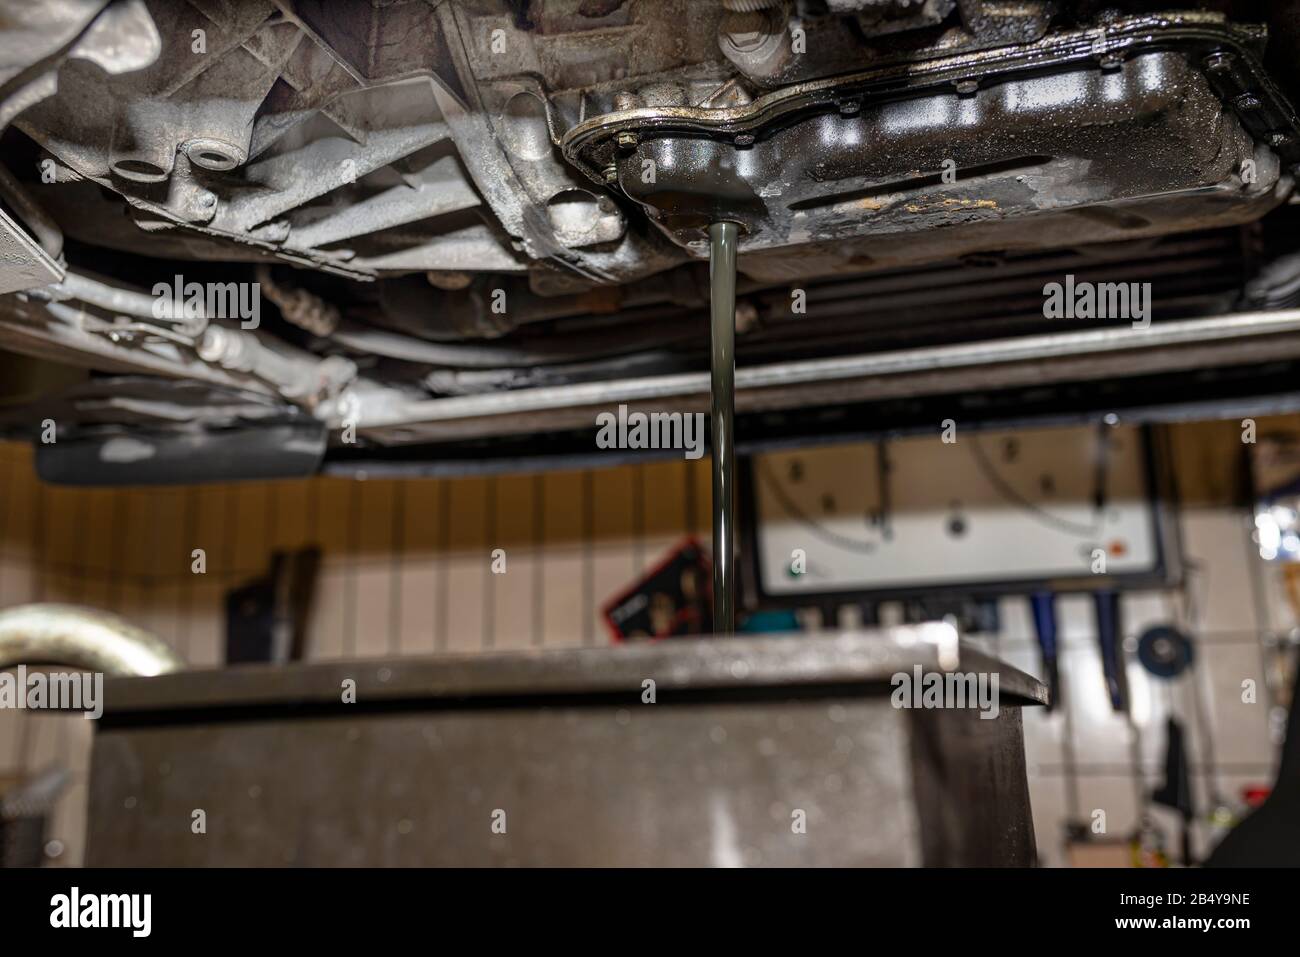 Draining used diesel engine oil from an oil pan into a metal container in a car workshop. Stock Photo